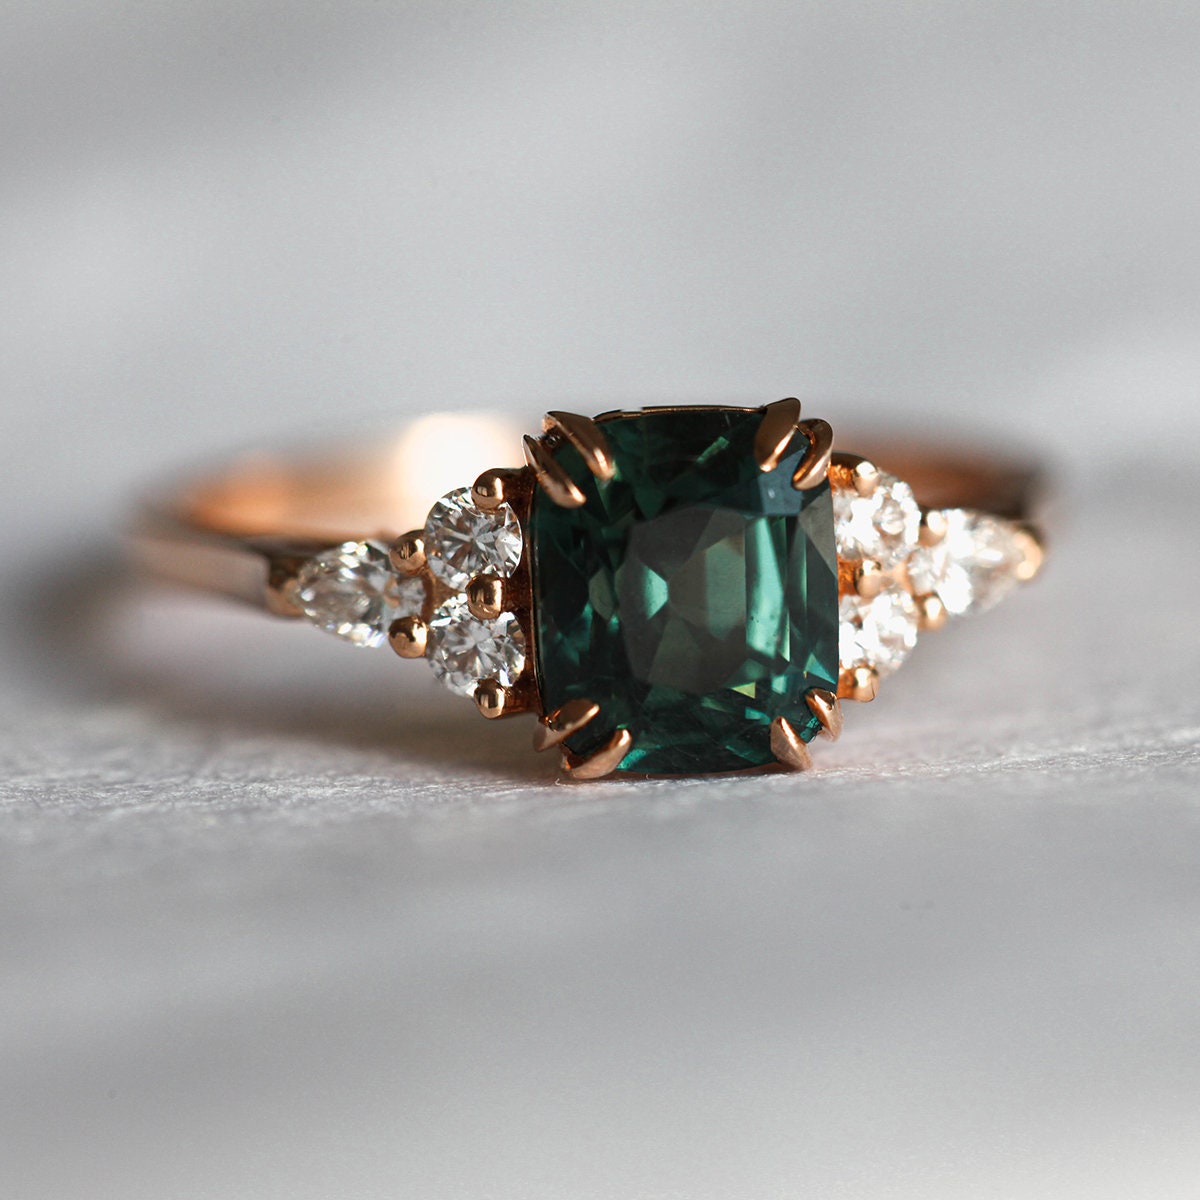 Cushion-cut teal sapphire cluster ring with diamonds